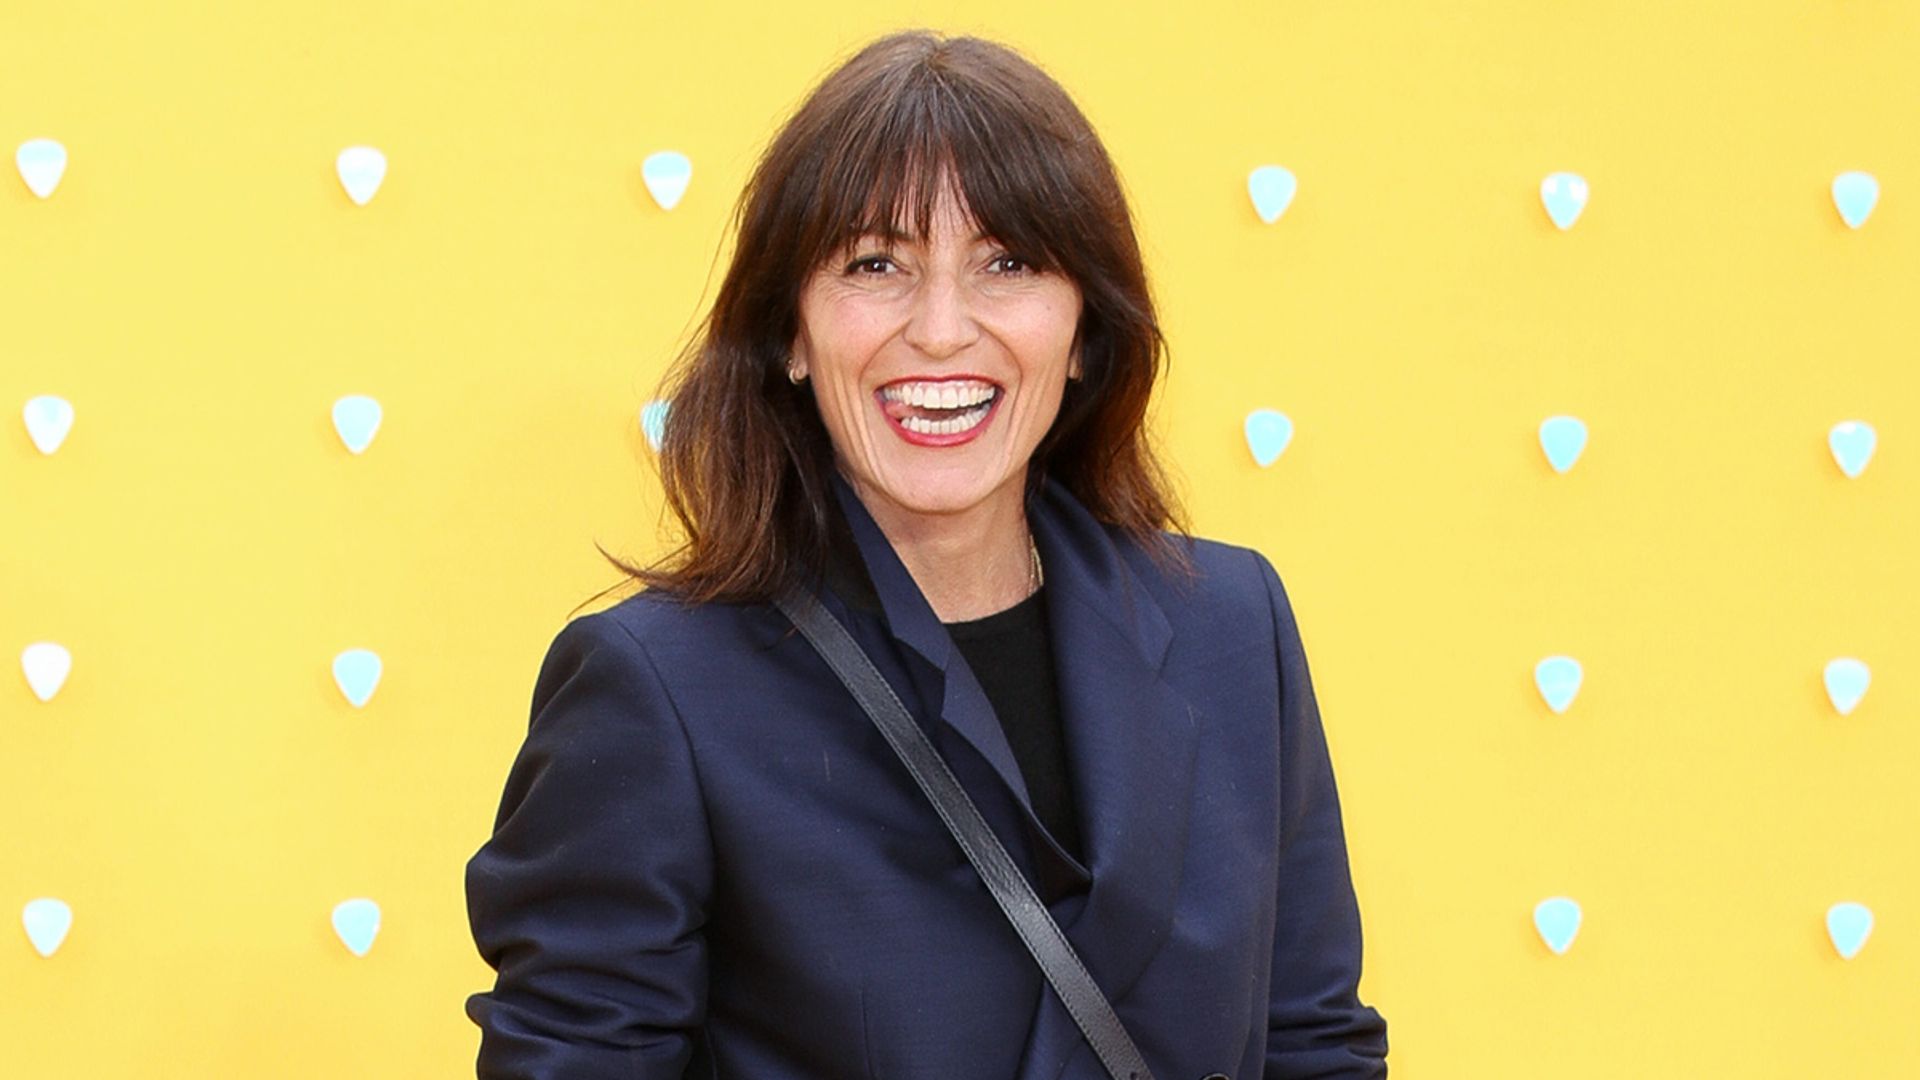 Davina McCall shares her No1 fitness tip for Christmas - and anyone can do it